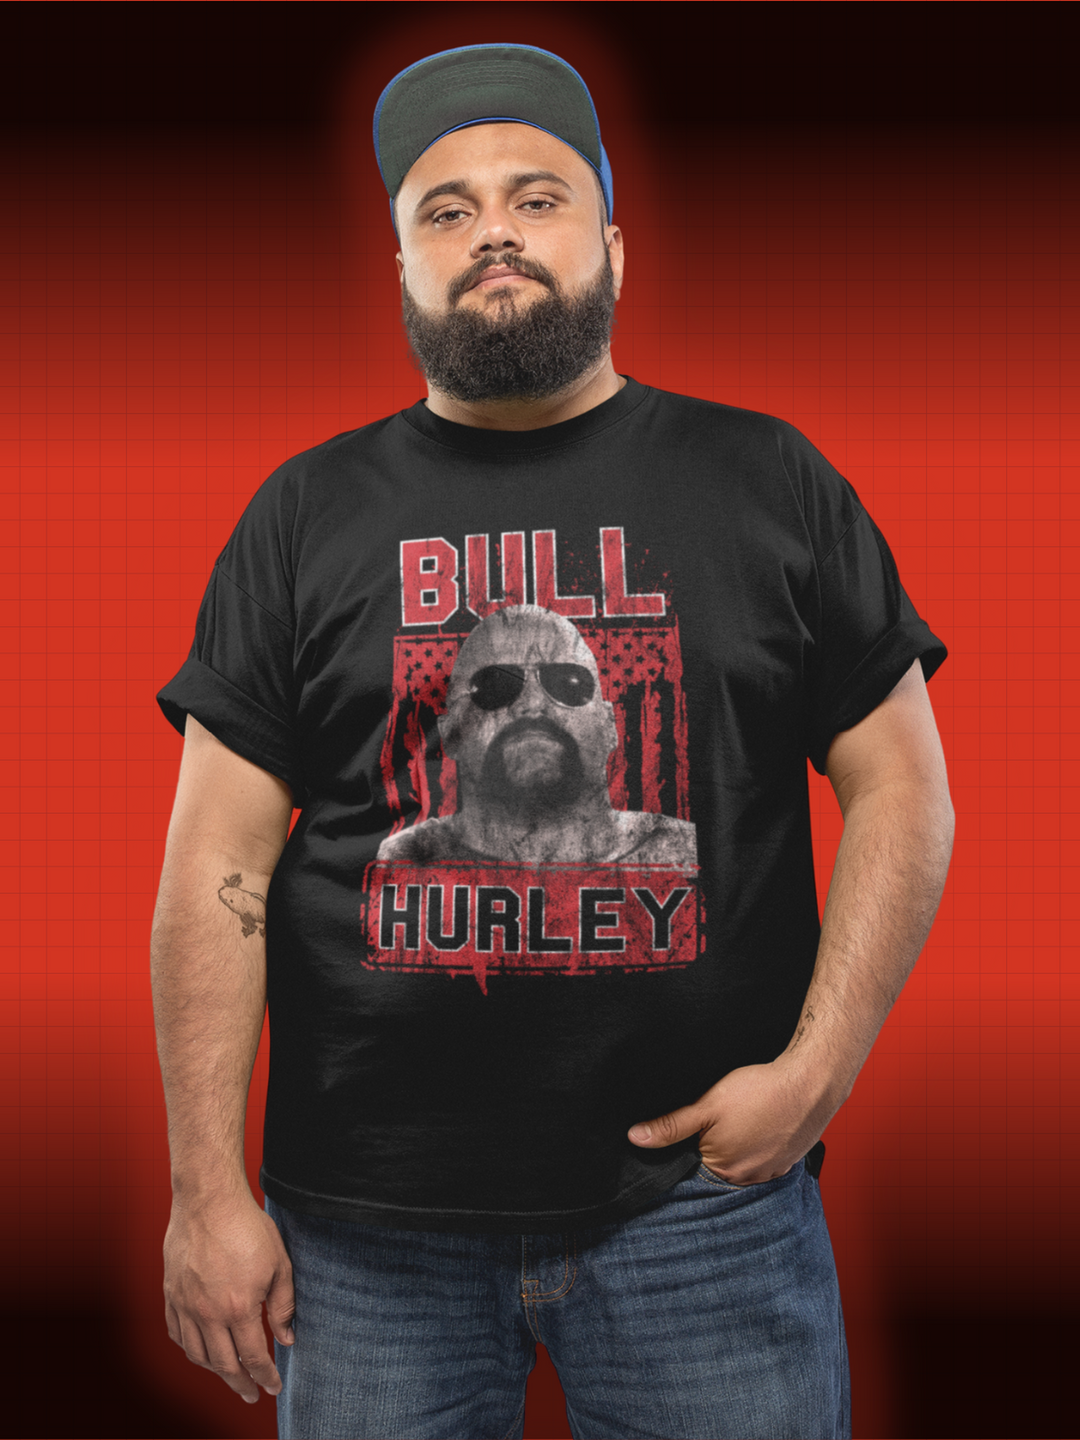 BULL HURLEY | OVER THE TOP STALLONE | T-SHIRT - DRAMAMONKS